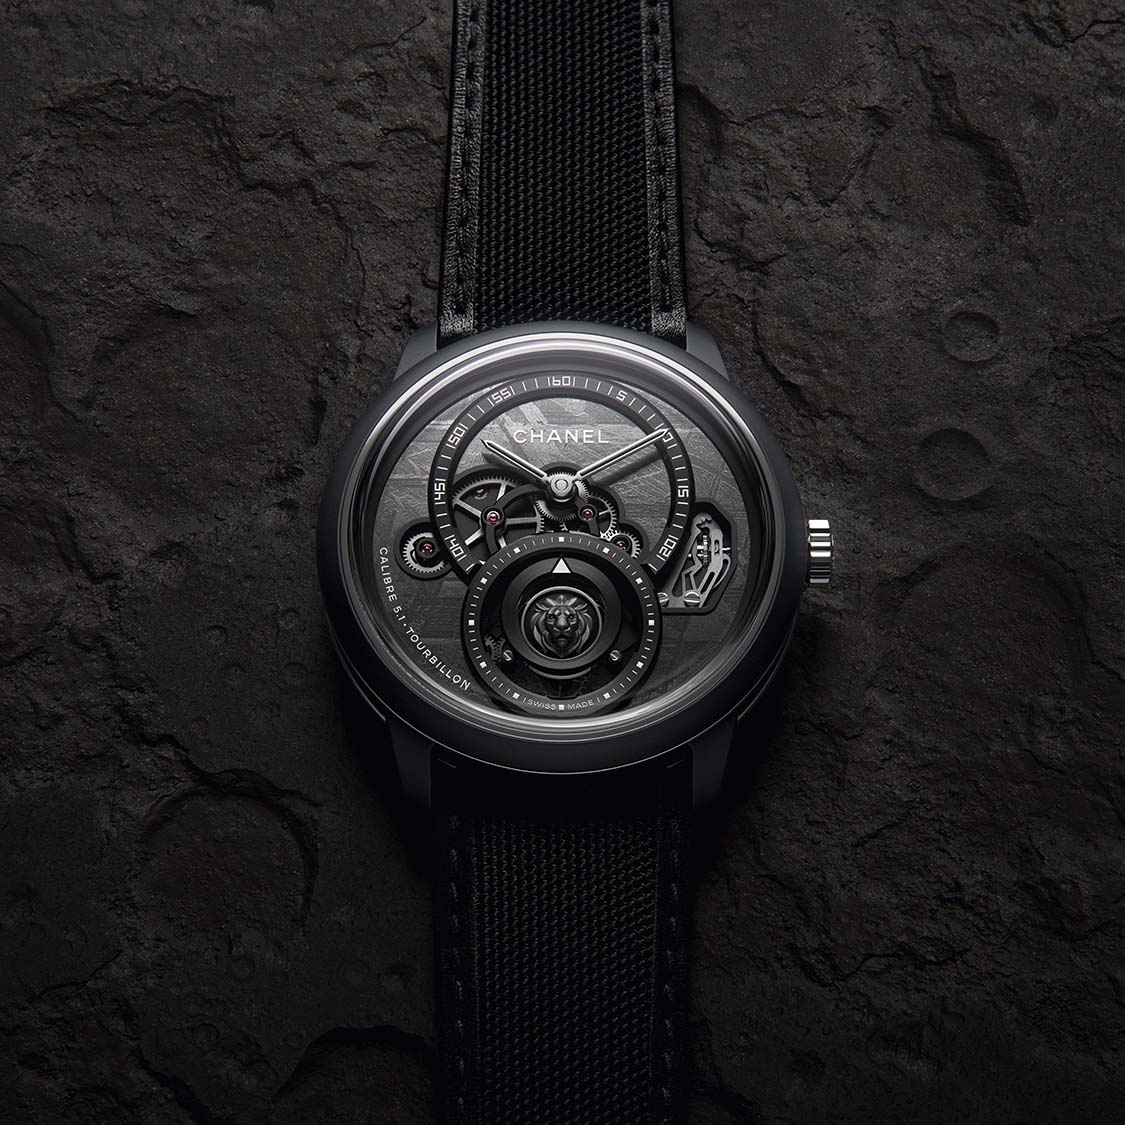 The J12 watch - watchmaking icon